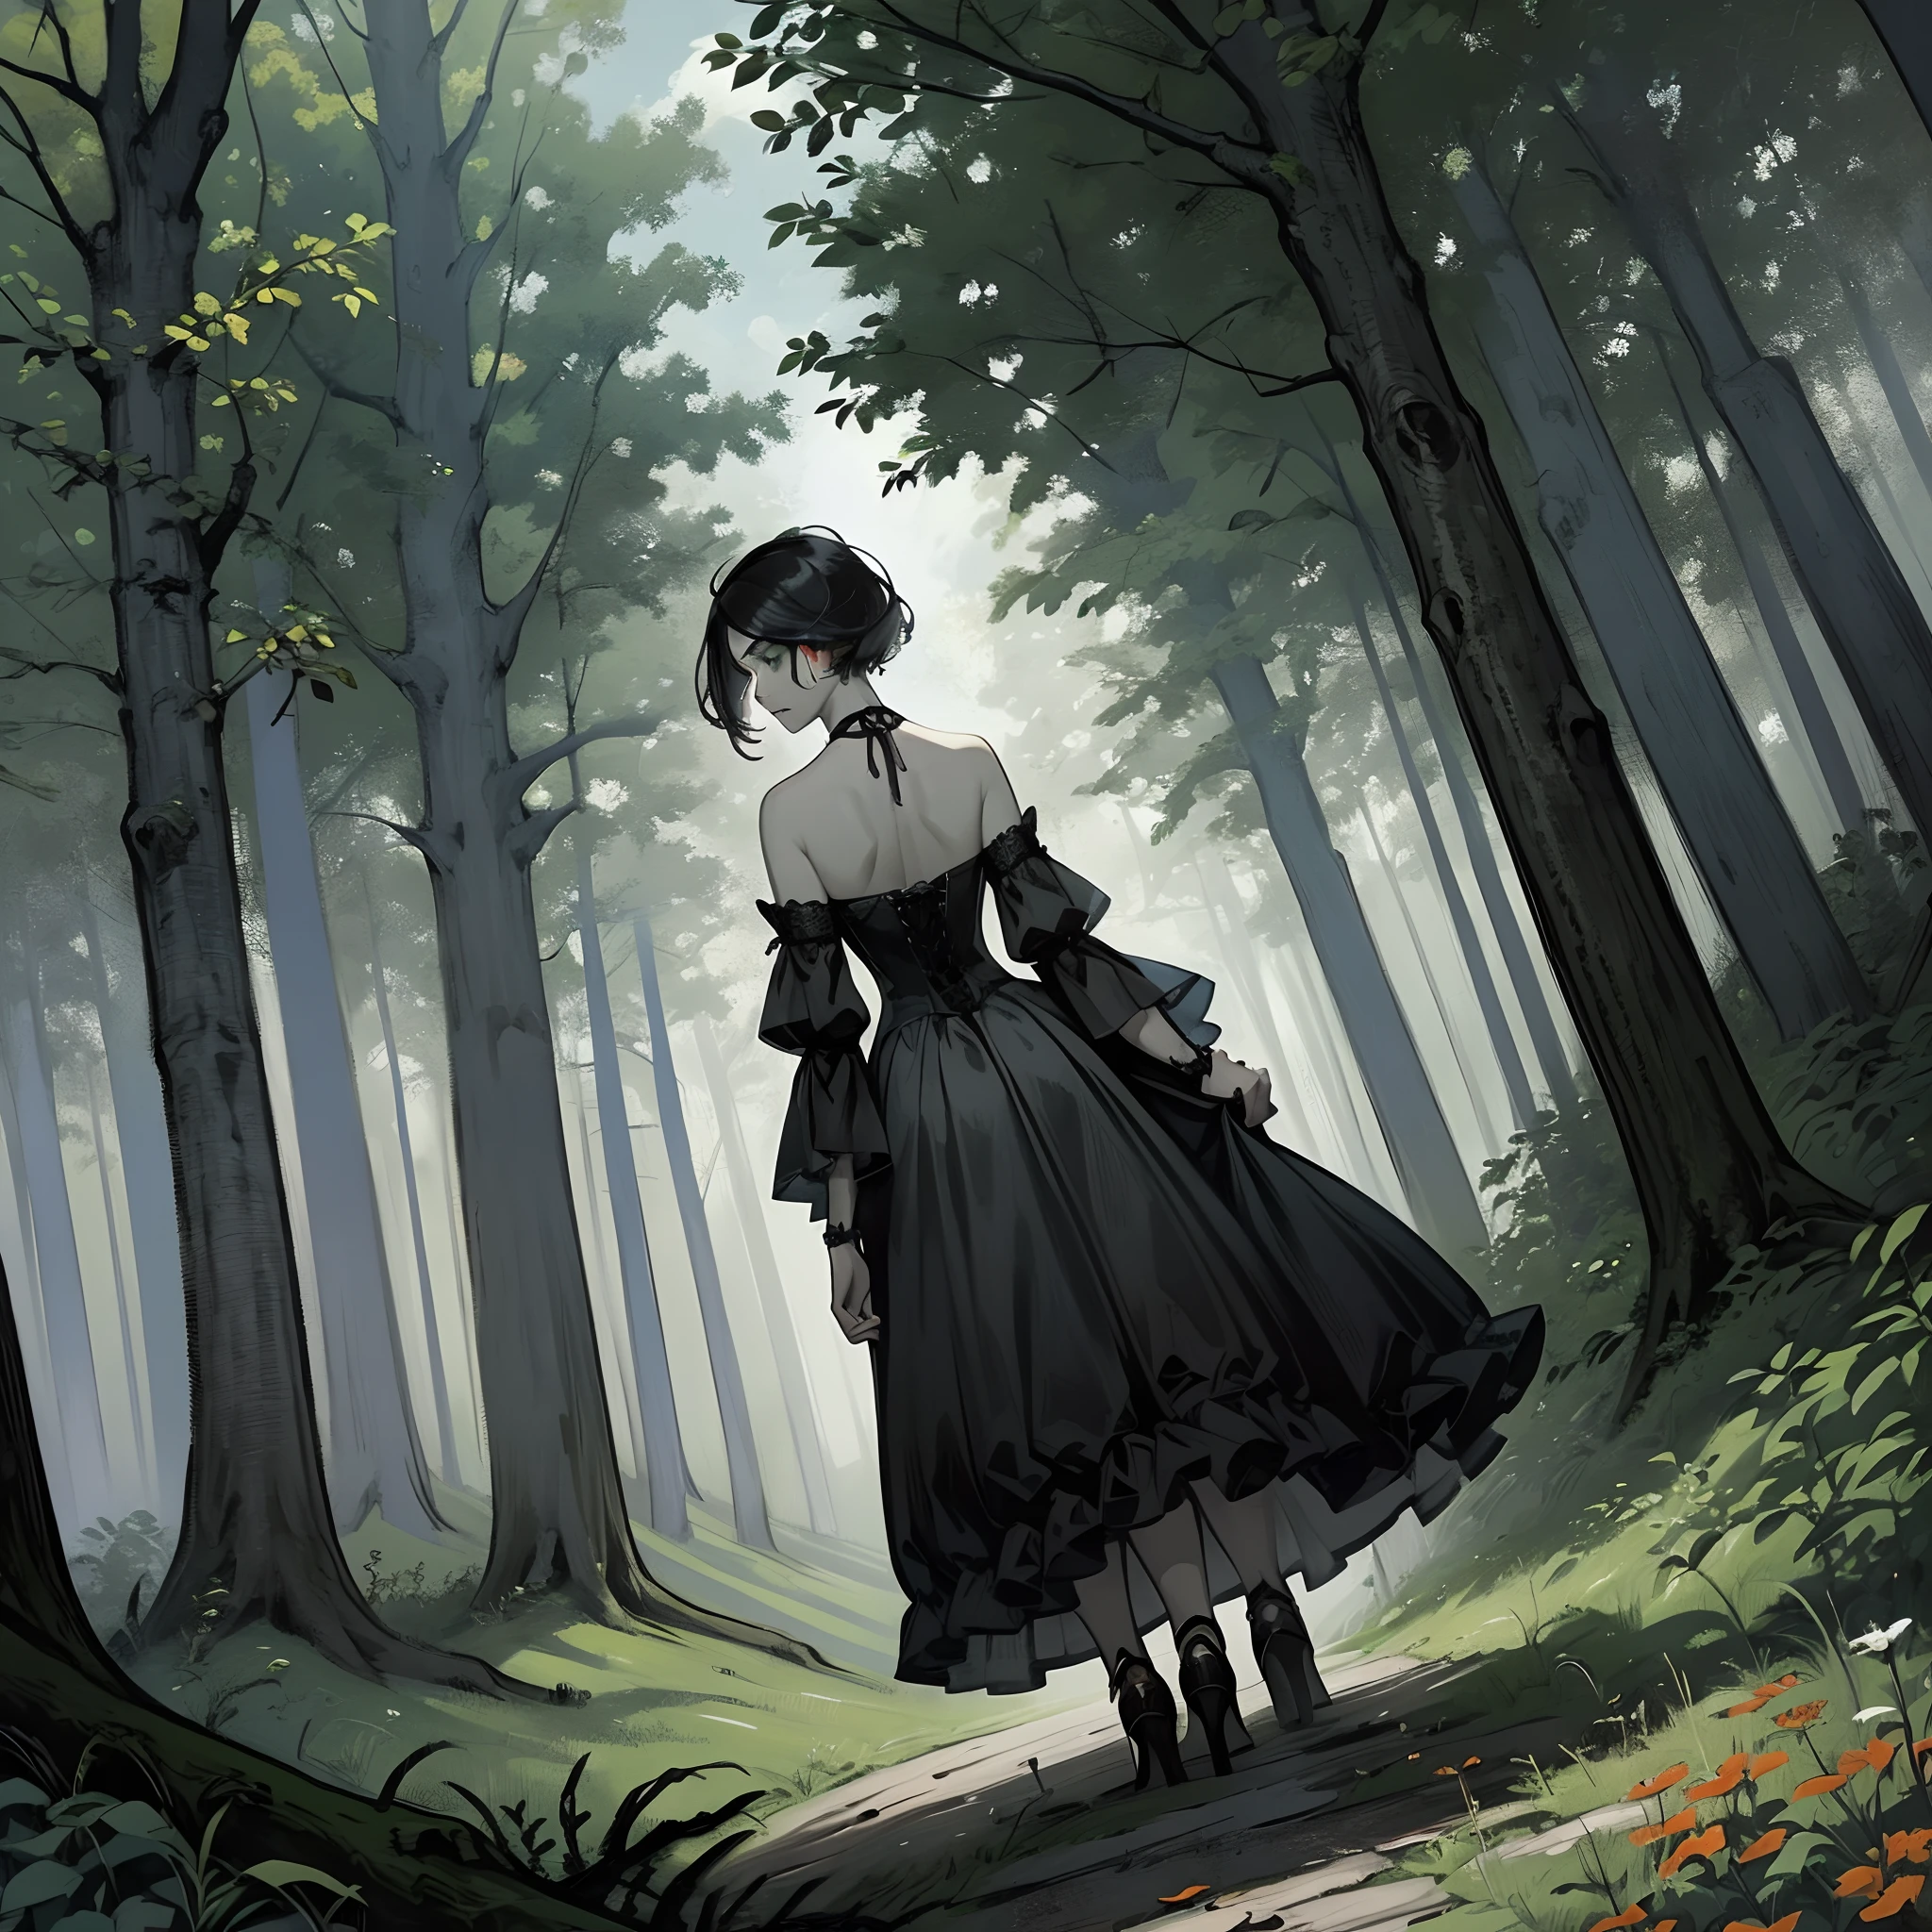 1 Girl with short black hair, pale gray skin in an orange dress in the woods struggling to walk. The camera is behind her Dutch tilt angle, camera is tilted, we see her back. Big scary bended trees gothic trees bended branches warped twisted scenery, painted, oil painting style, gothic art, scary art, horror, sad, depressing, ugly scenery